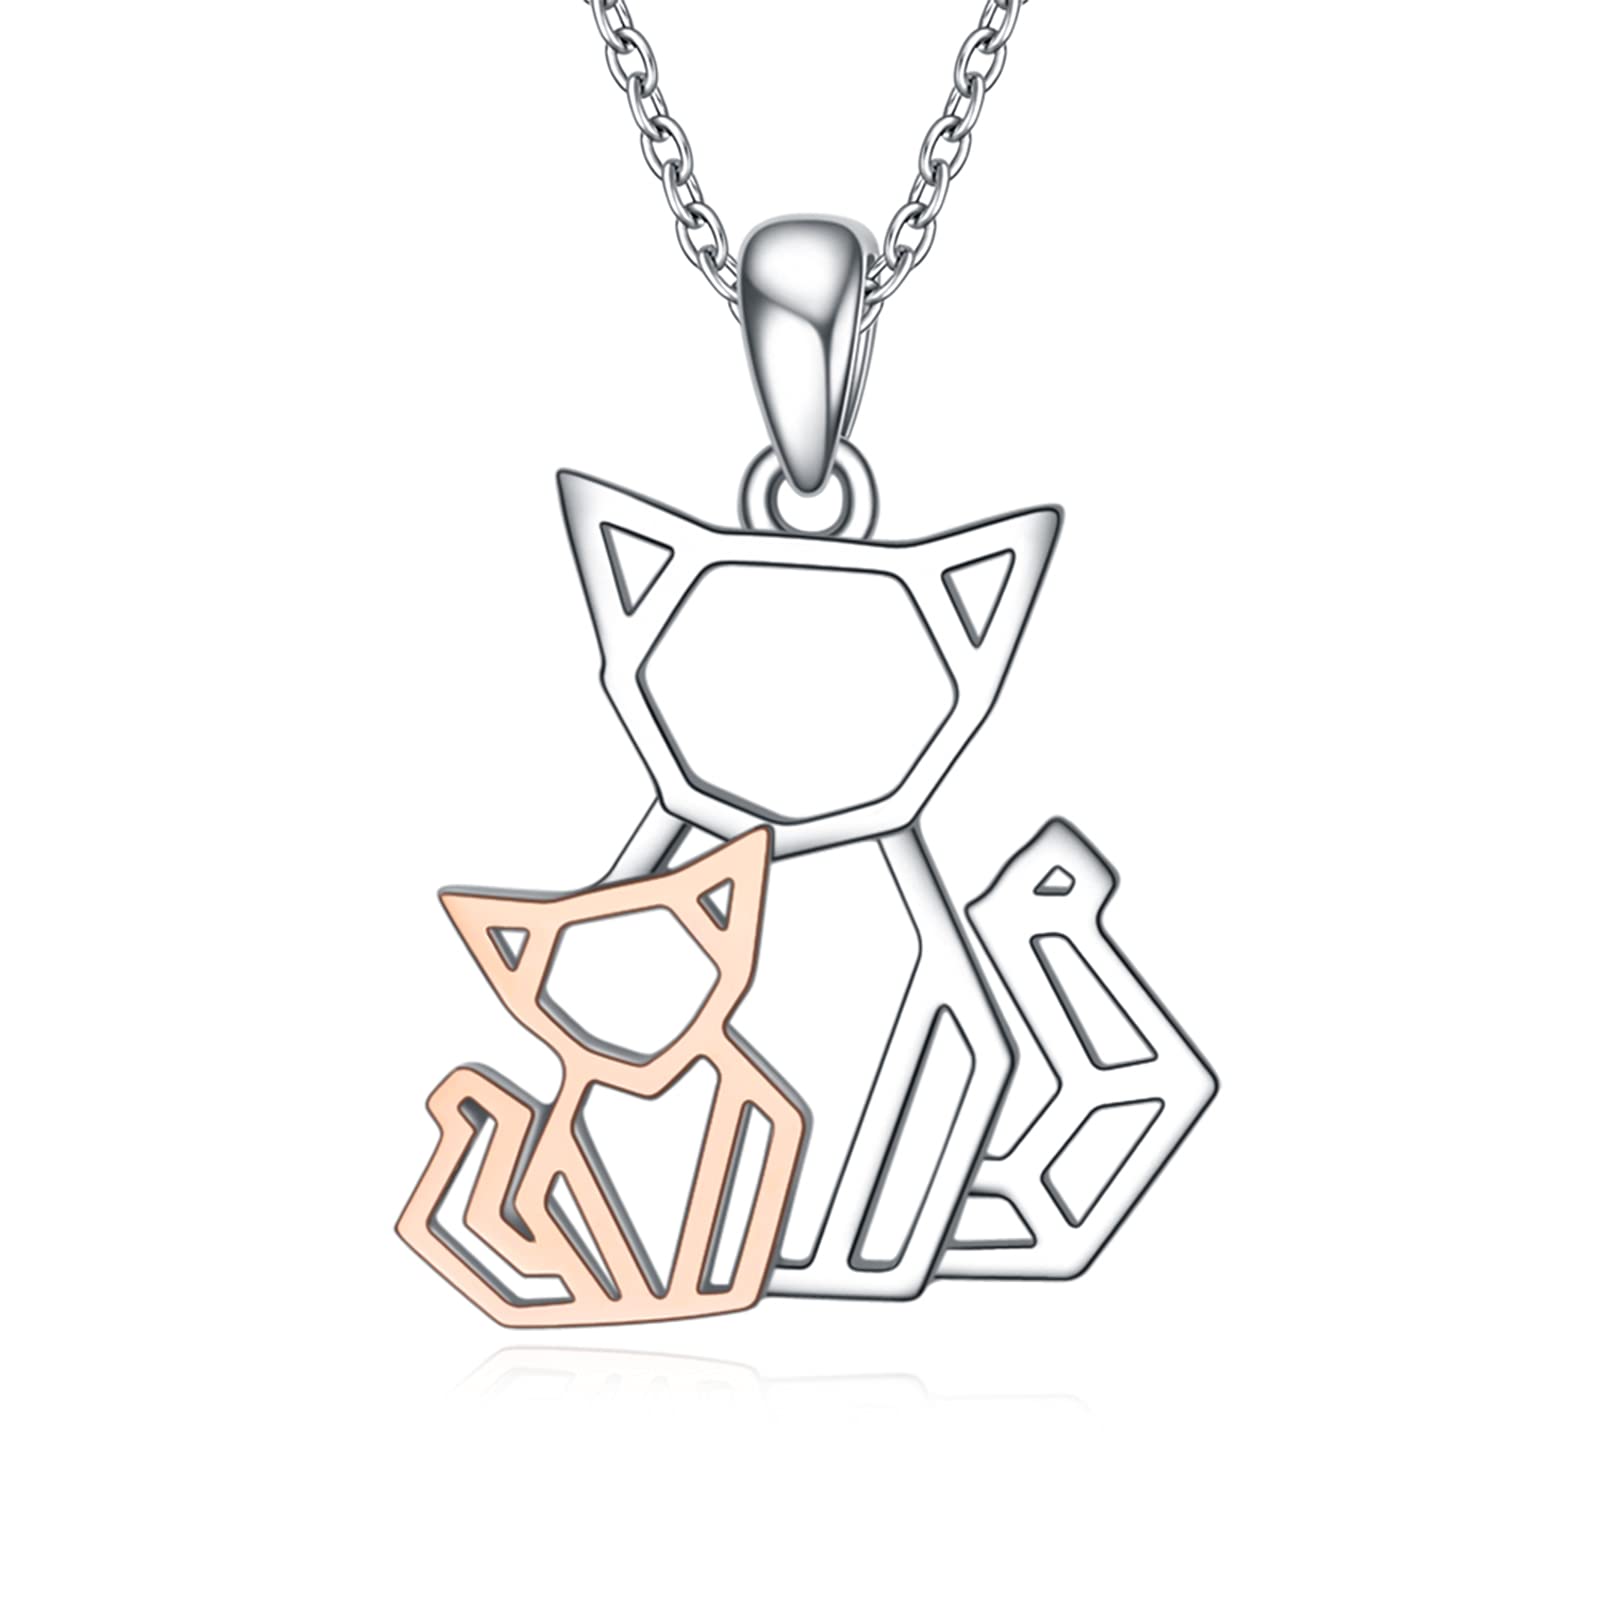 Angel caller Cat Necklaces 925 Sterling Silver Jewelry Cute Double Two-Tone Cat Pendant Cubic Zirconia Necklace Rolo Chain,Eternal Love Heart Necklace for Women,Girls